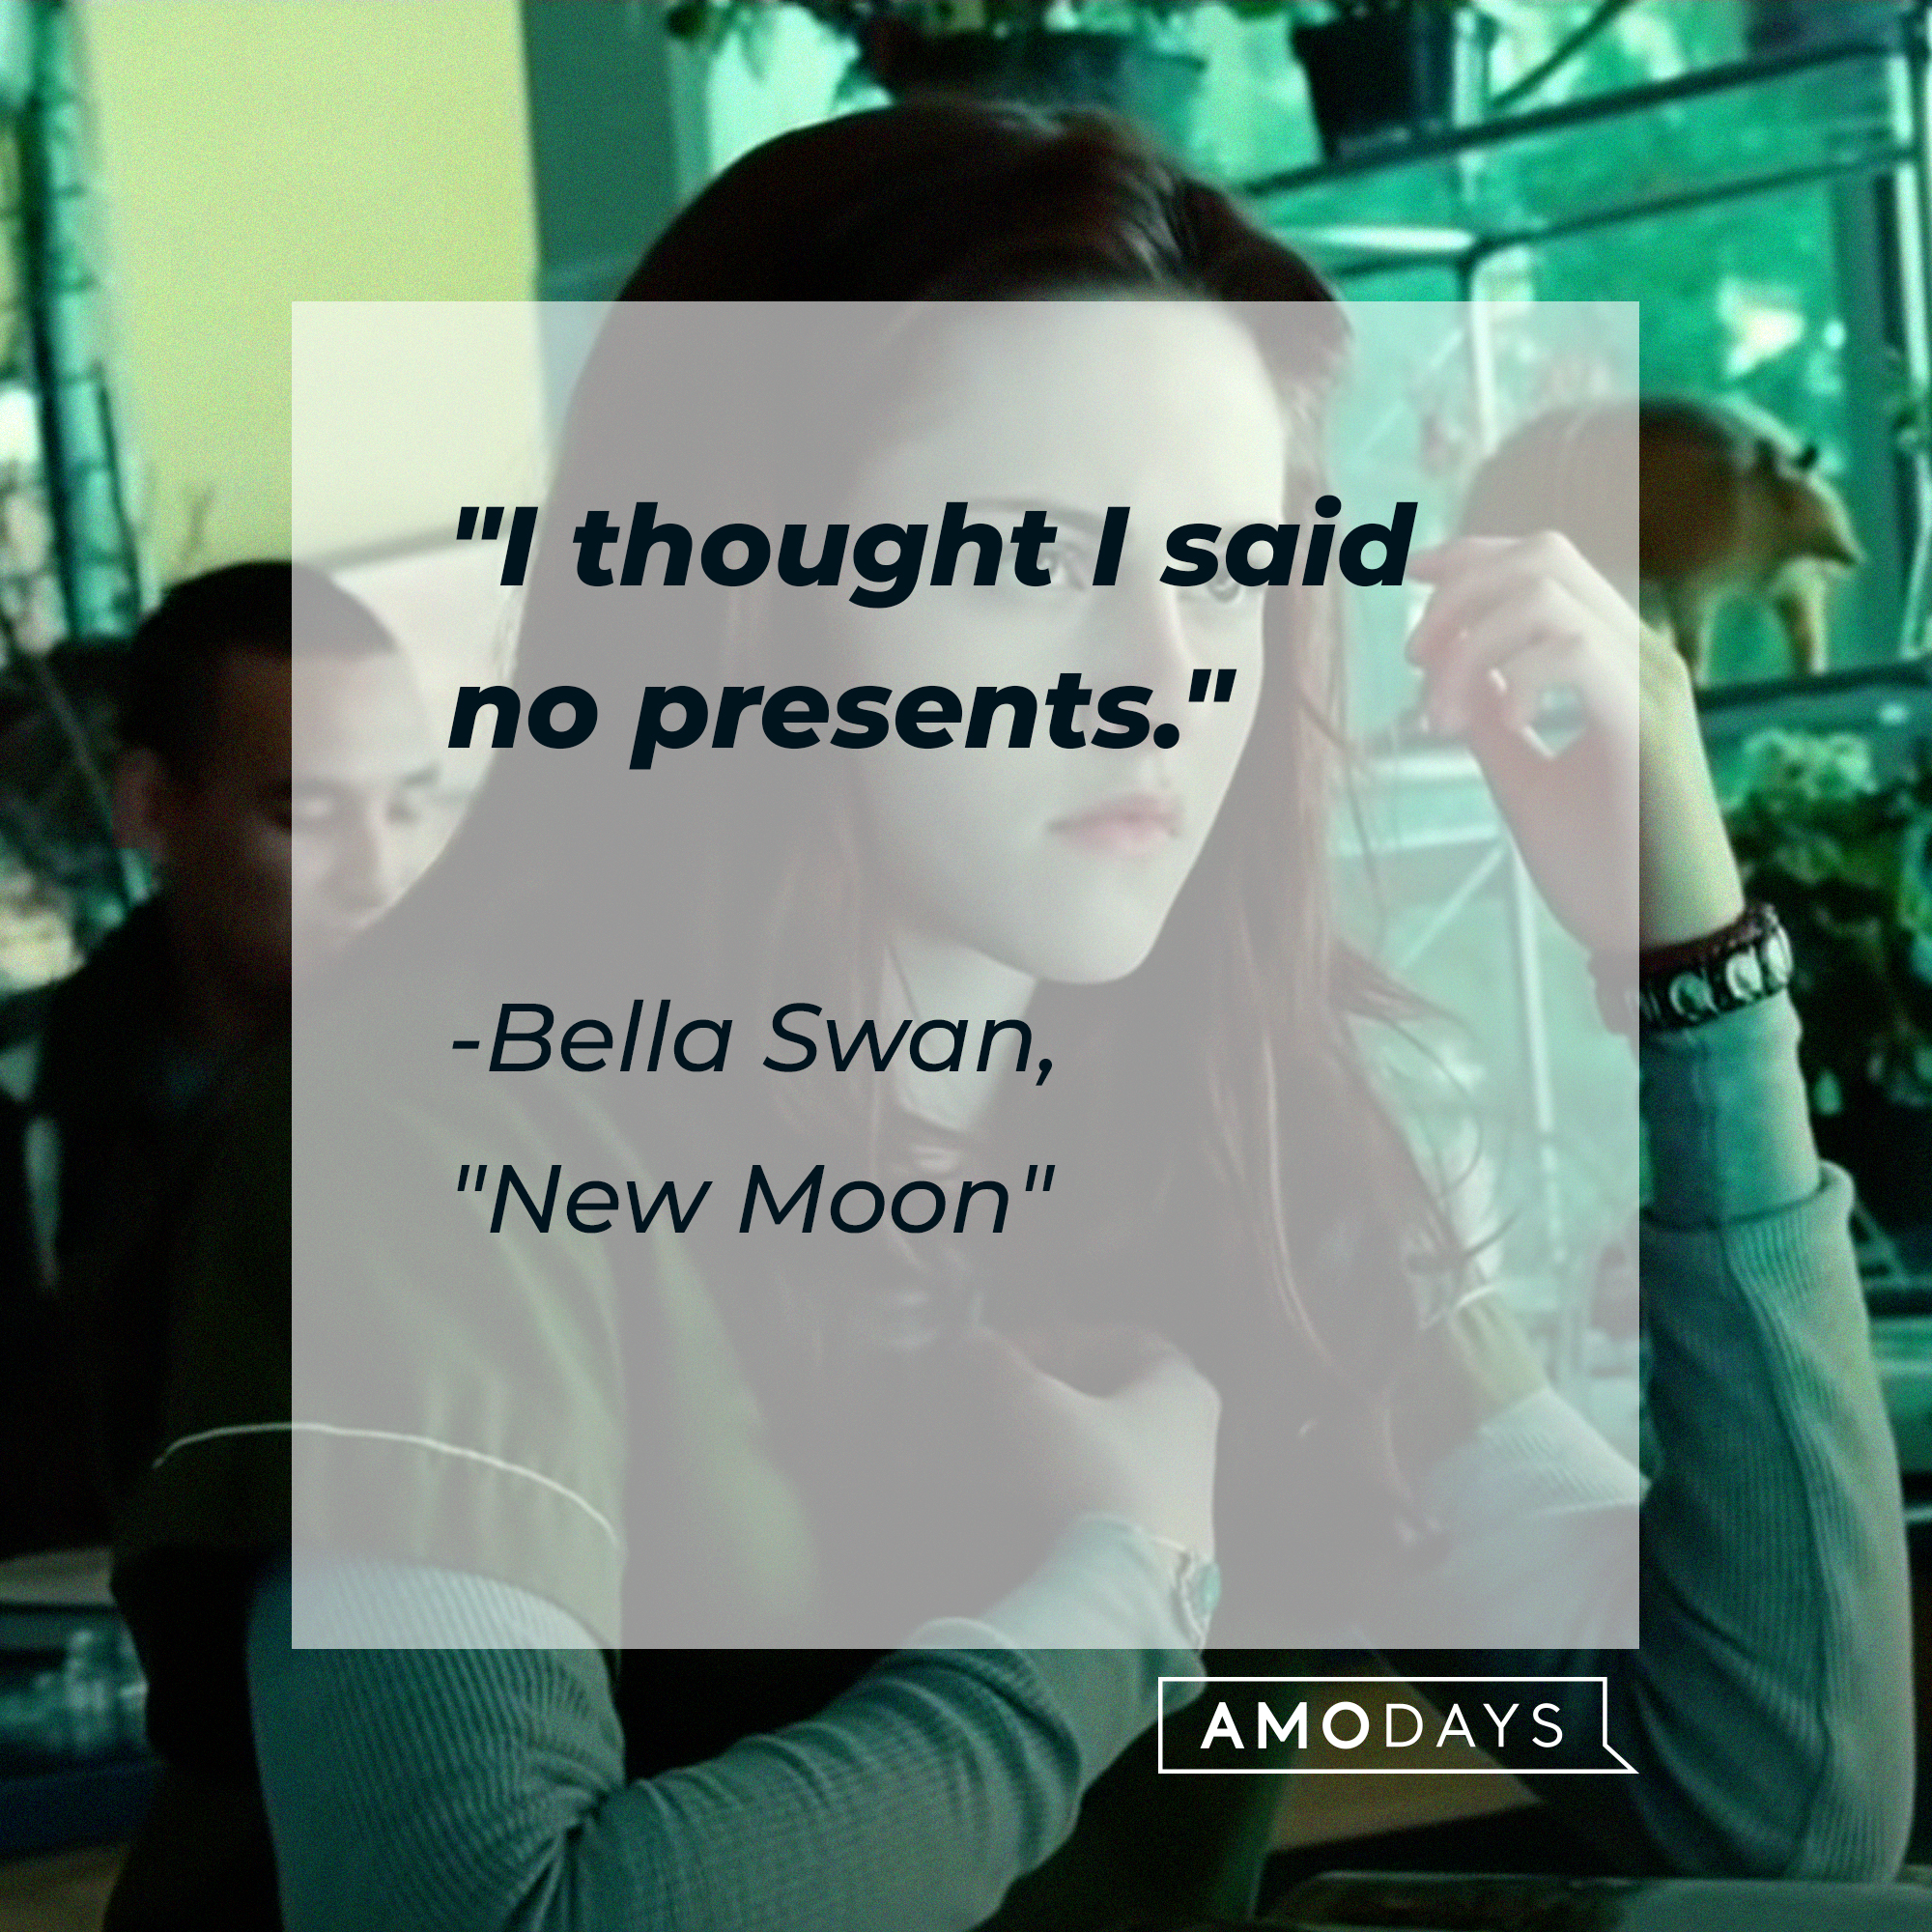 Bella Swan with her quote: "I thought I said no presents." | Source: Facebook.com/twilight